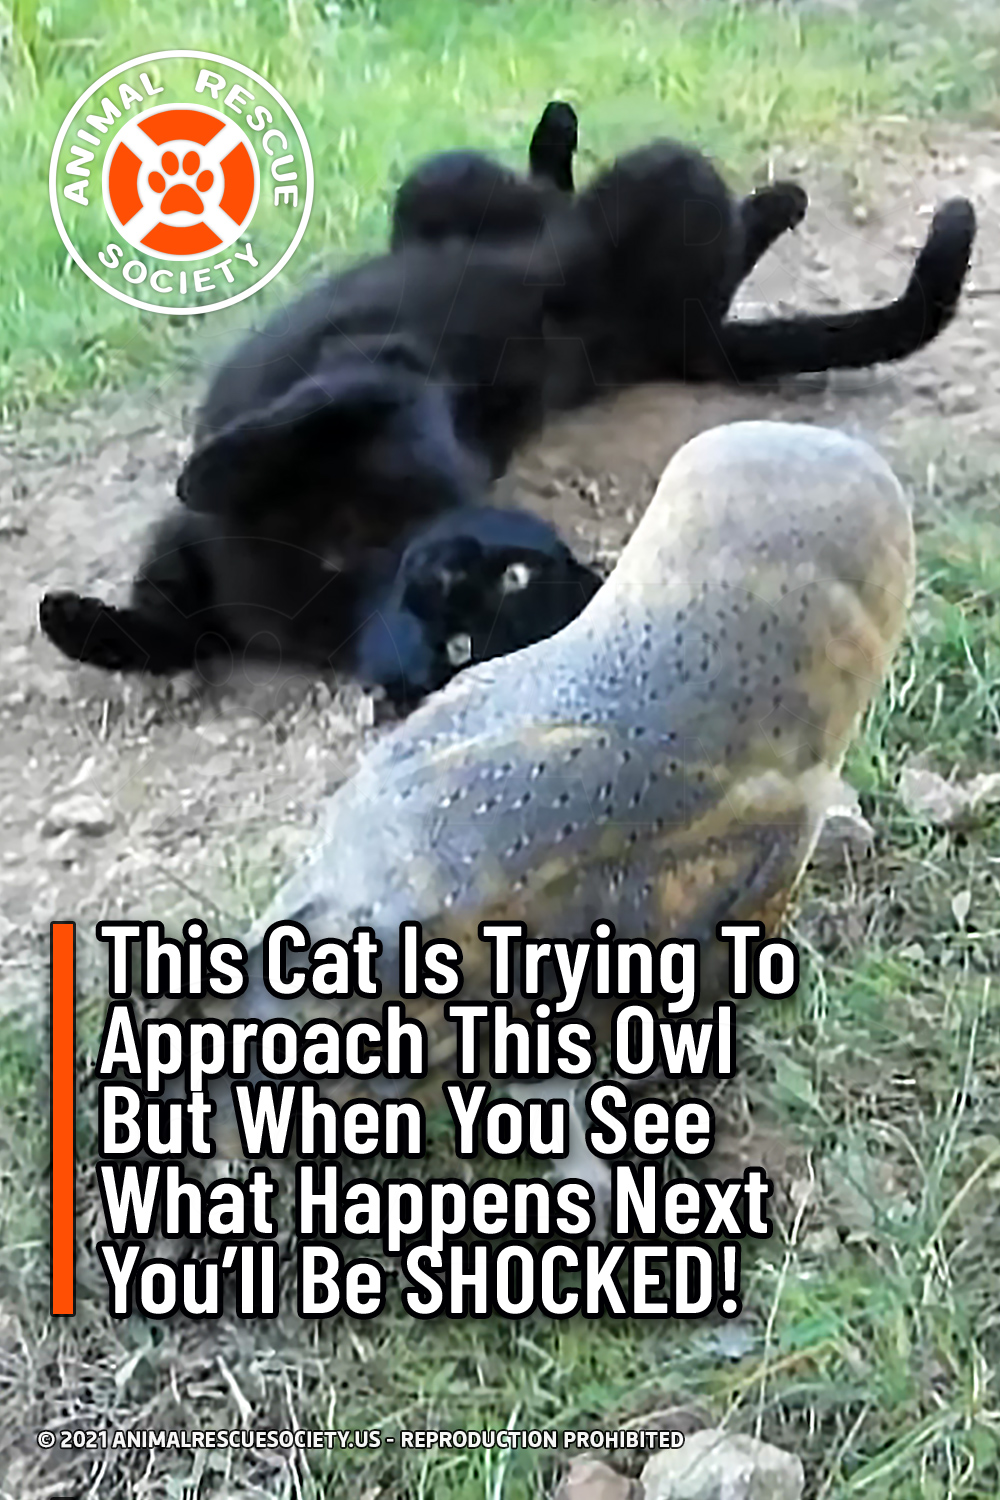 This Cat Is Trying To Approach This Owl But When You See What Happens Next You’ll Be SHOCKED!